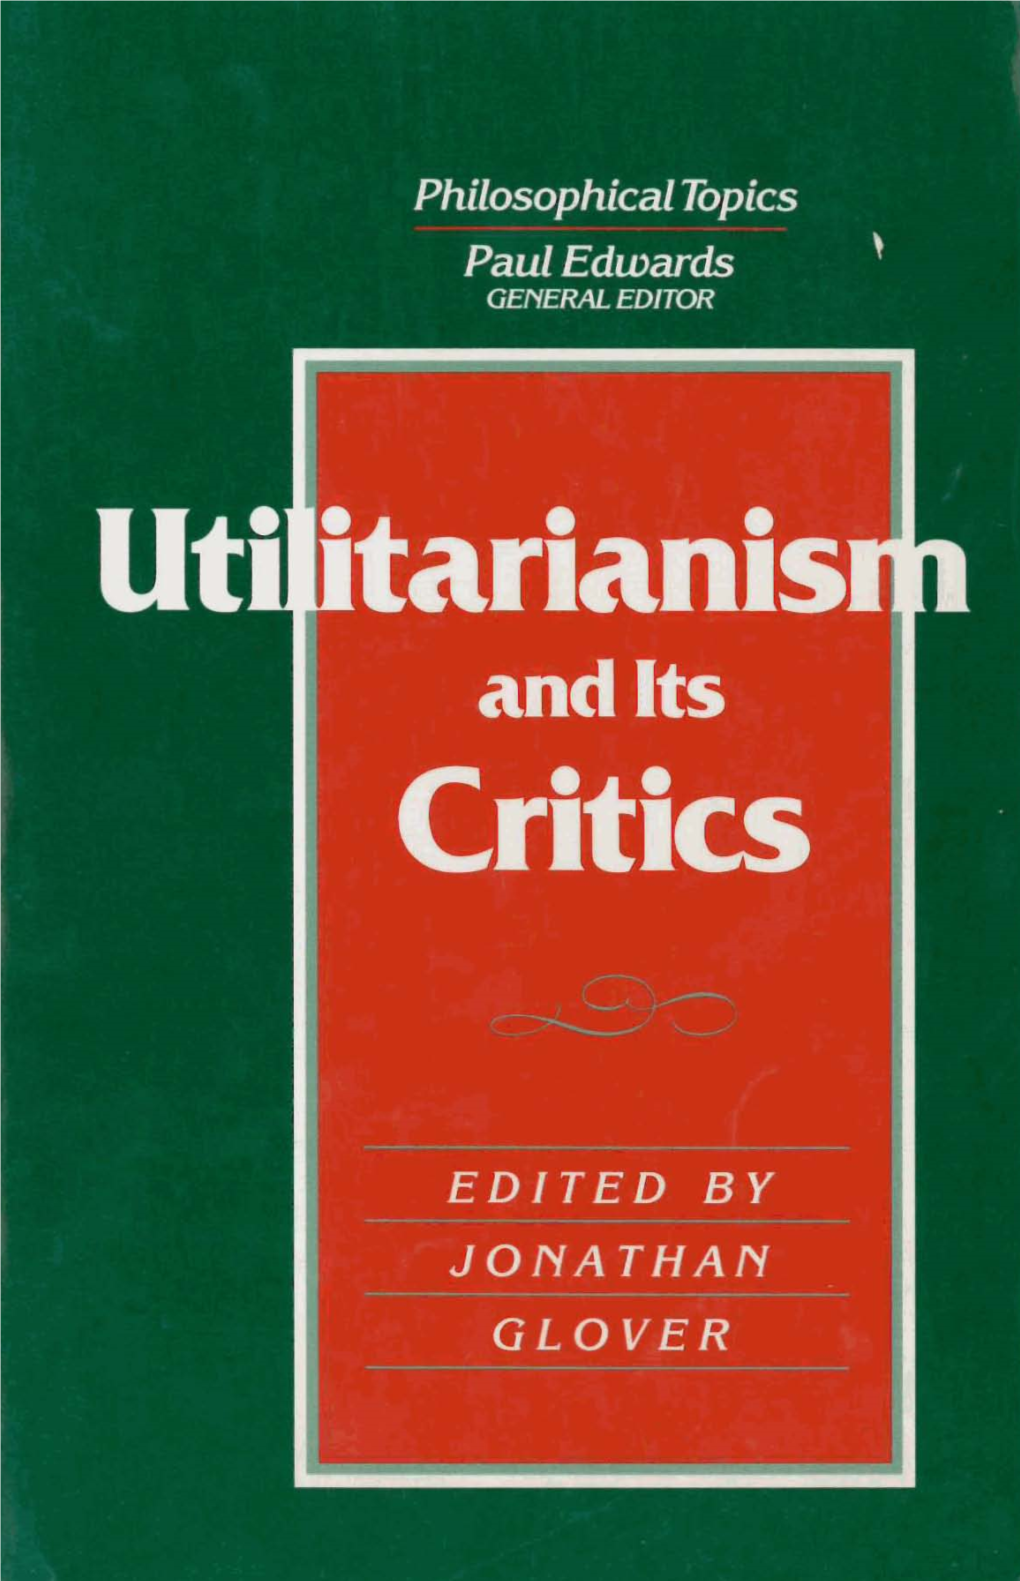 Utilitarianism and Its Critics / Edited with Sn Introduction by Jonathan Glover P, Cm.-(Philosoghical Topics) Bibliography: P